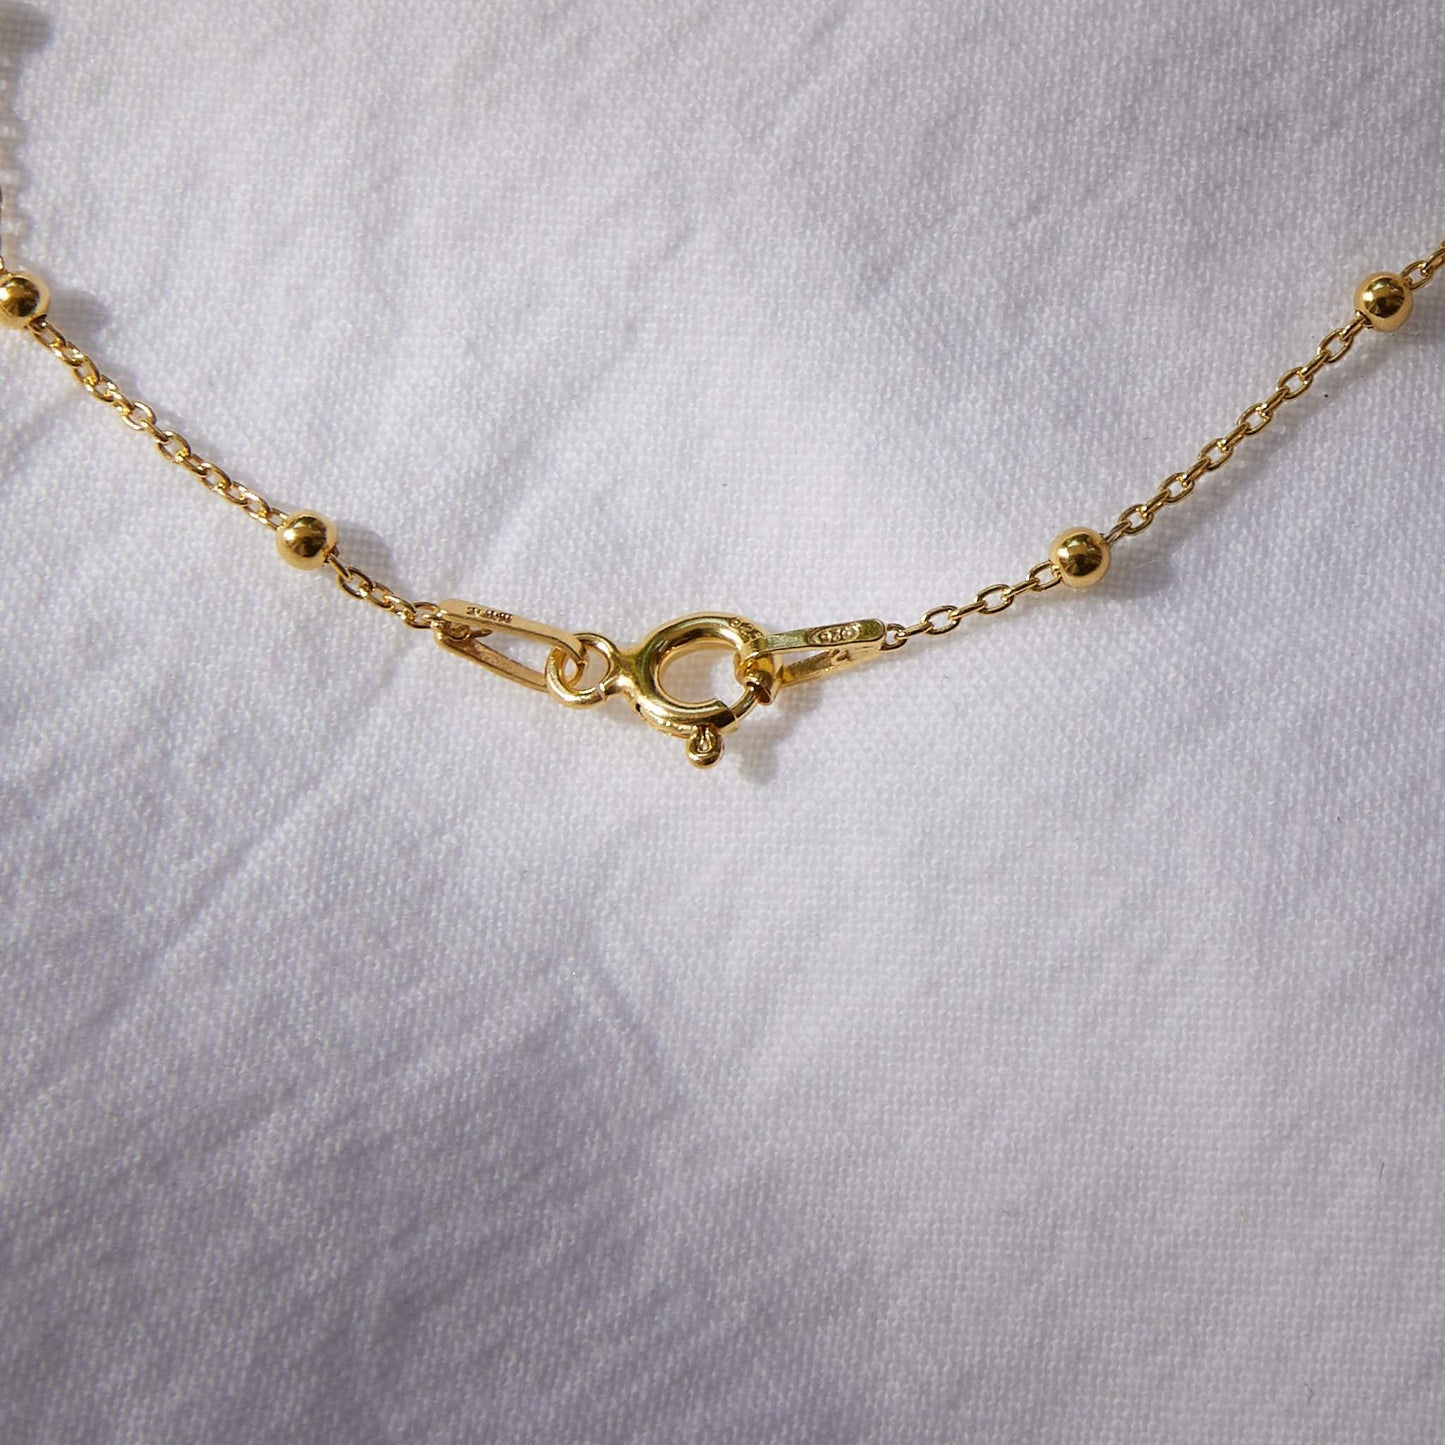 Evil eye necklace 24k gold plated ball chain